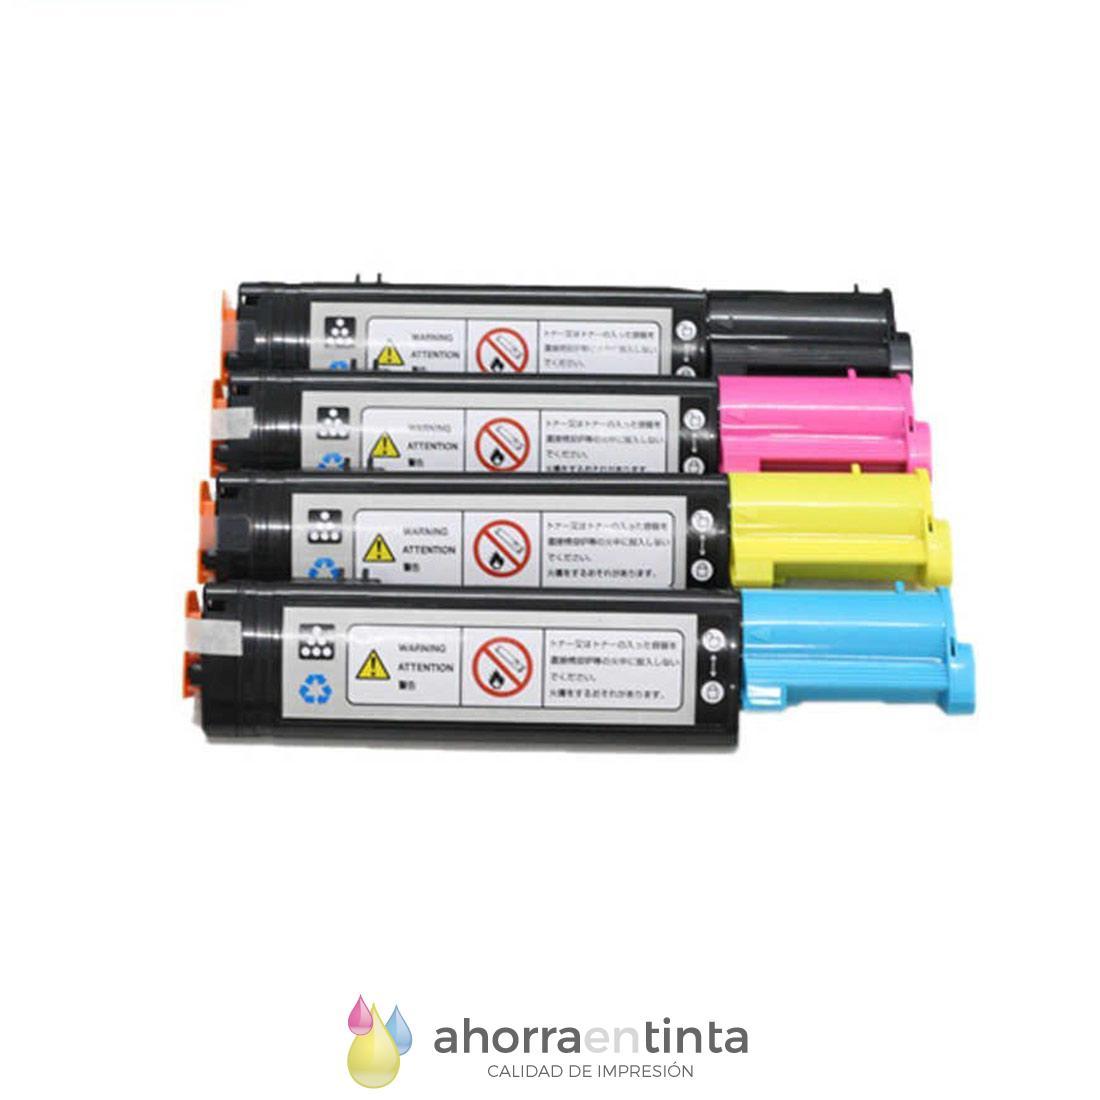 Epson C1100 Aculaser Cartucho Toner Compatible Con Cx11nnfnfcdell 3000 7113